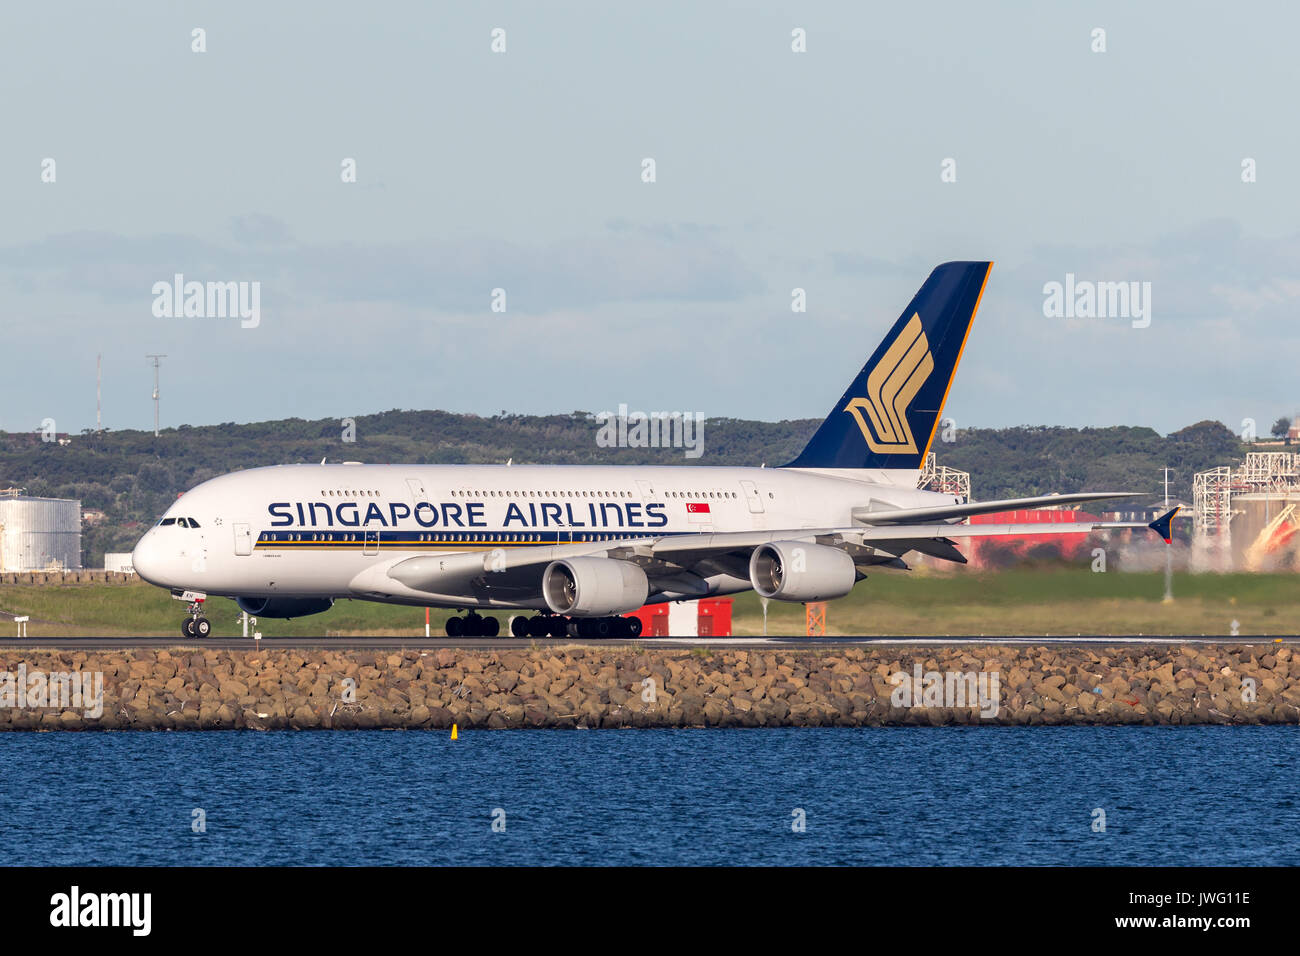 Singapore Airlines Airbus A380 aircraft at Sydney Airport. Stock Photo